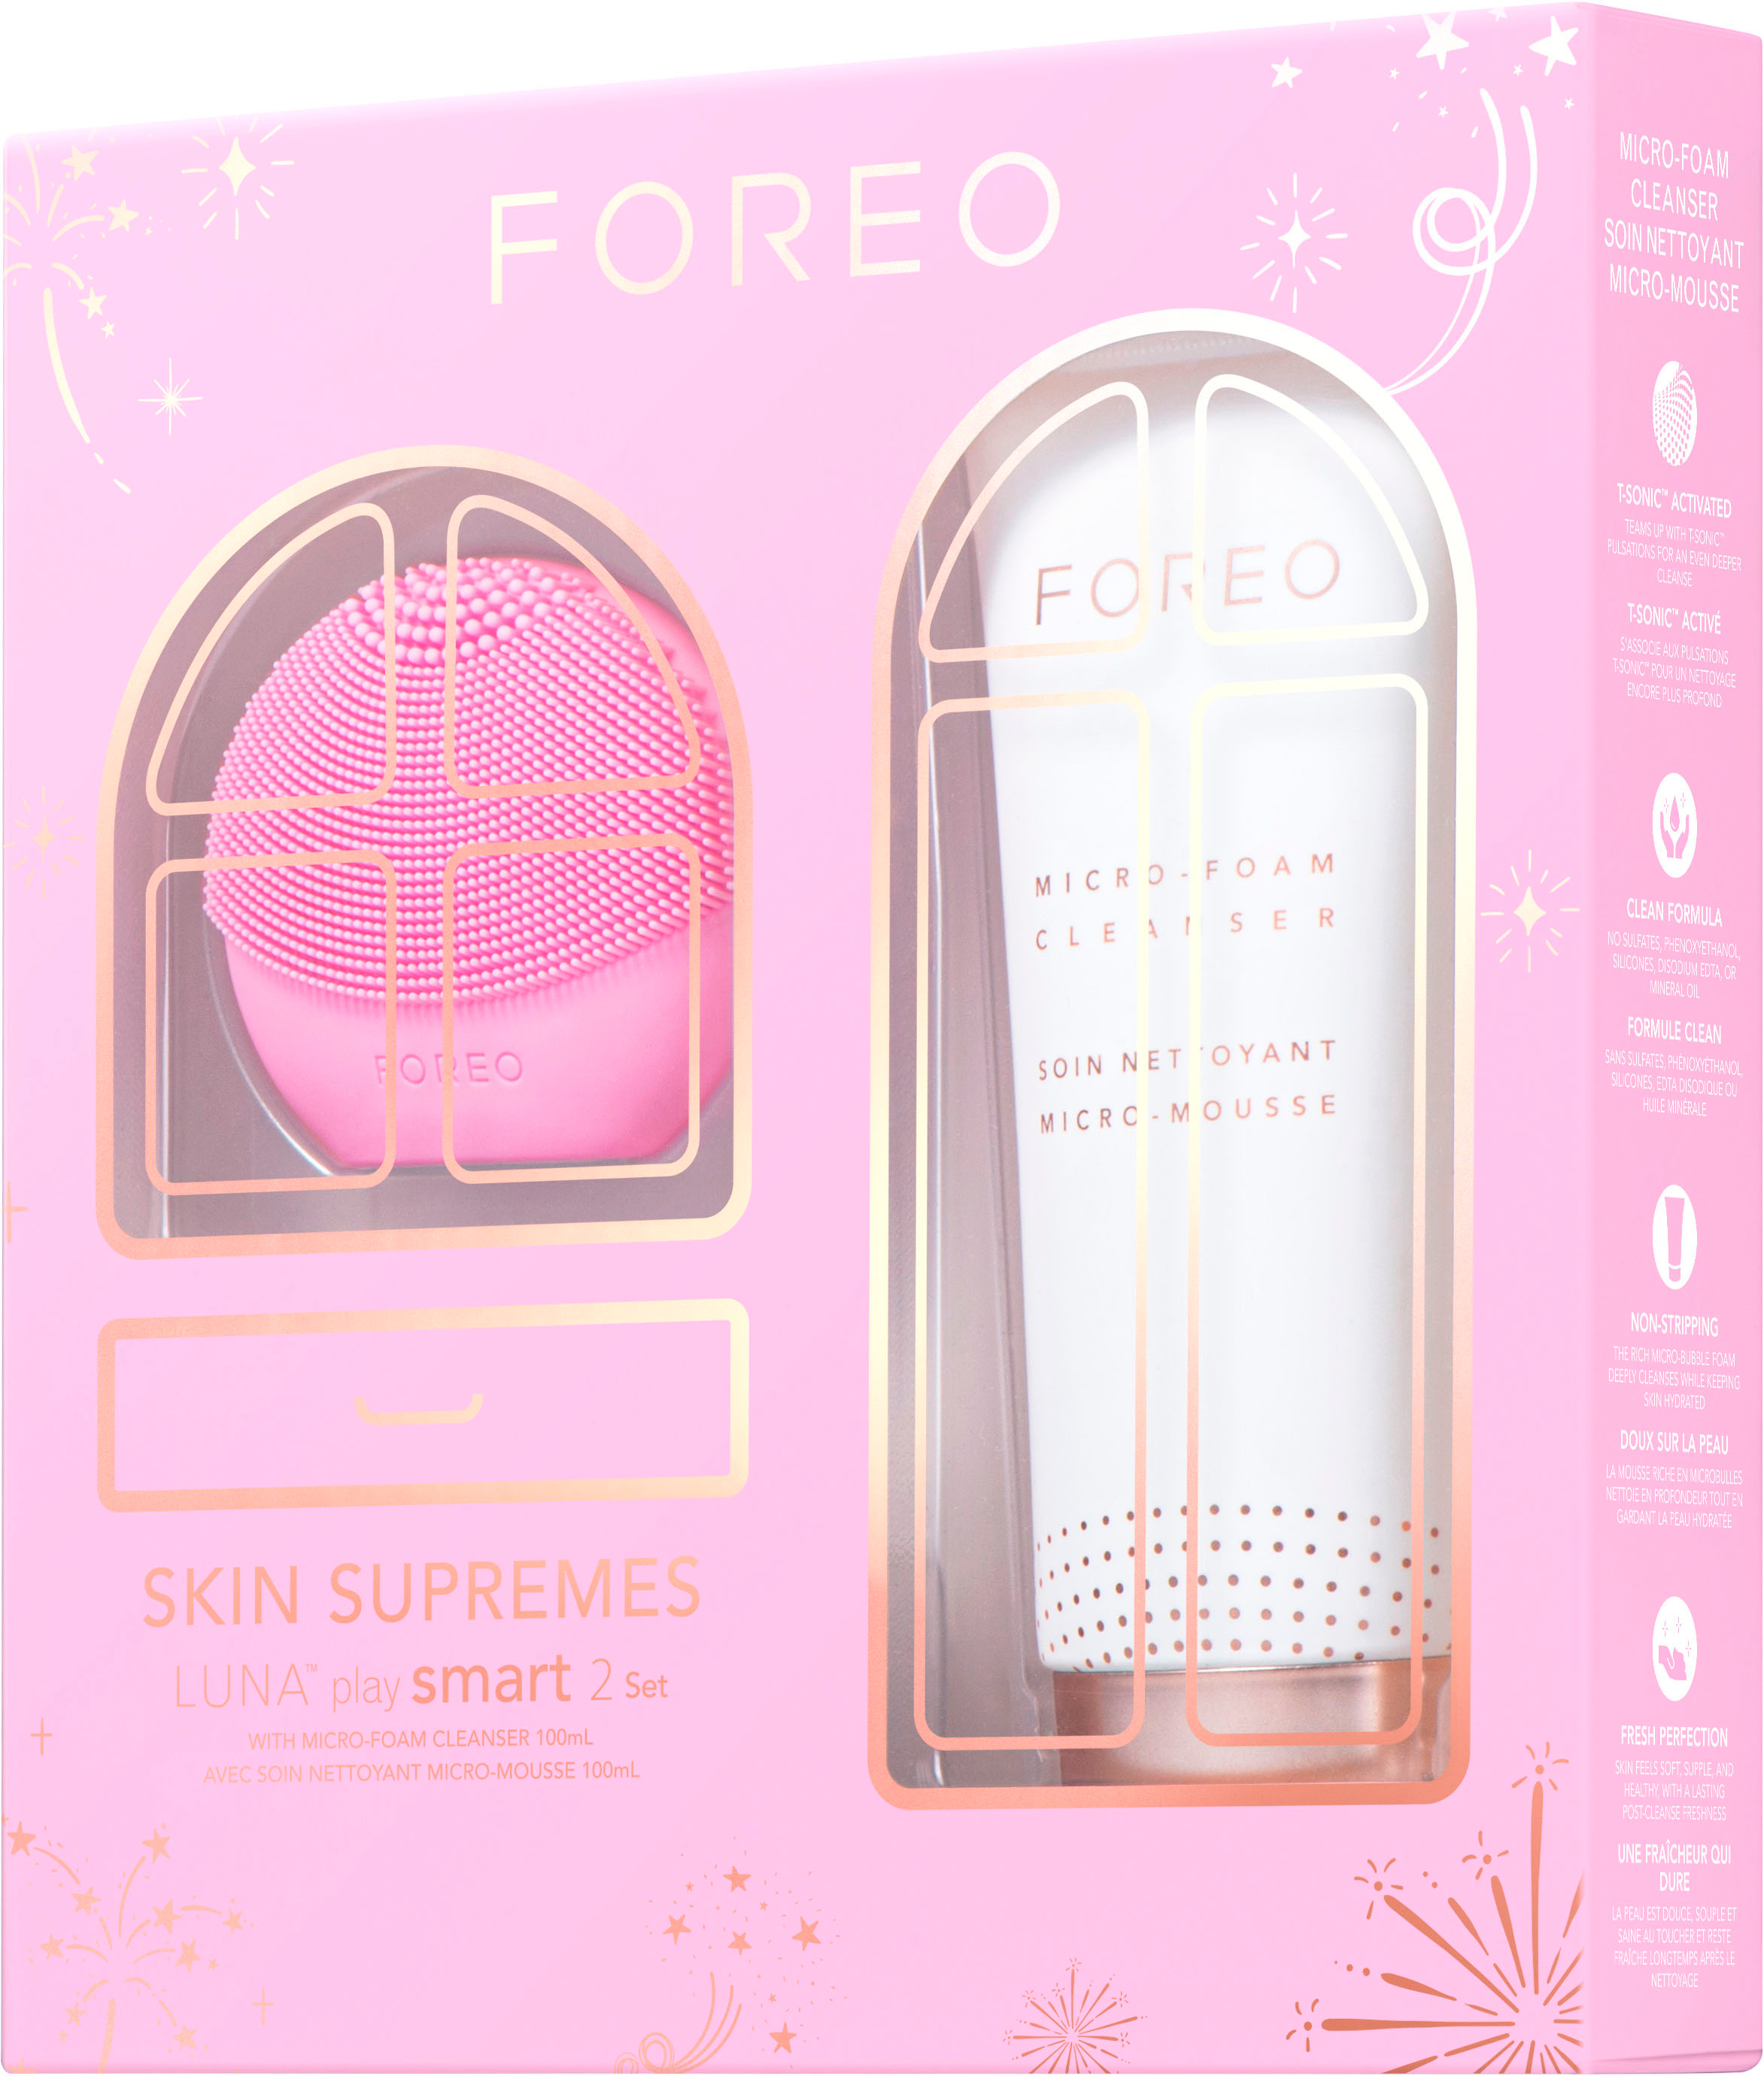 FOREO SKIN SUPREMES Set play 2 Buy LUNA™ - Collection: F1153 Best smart